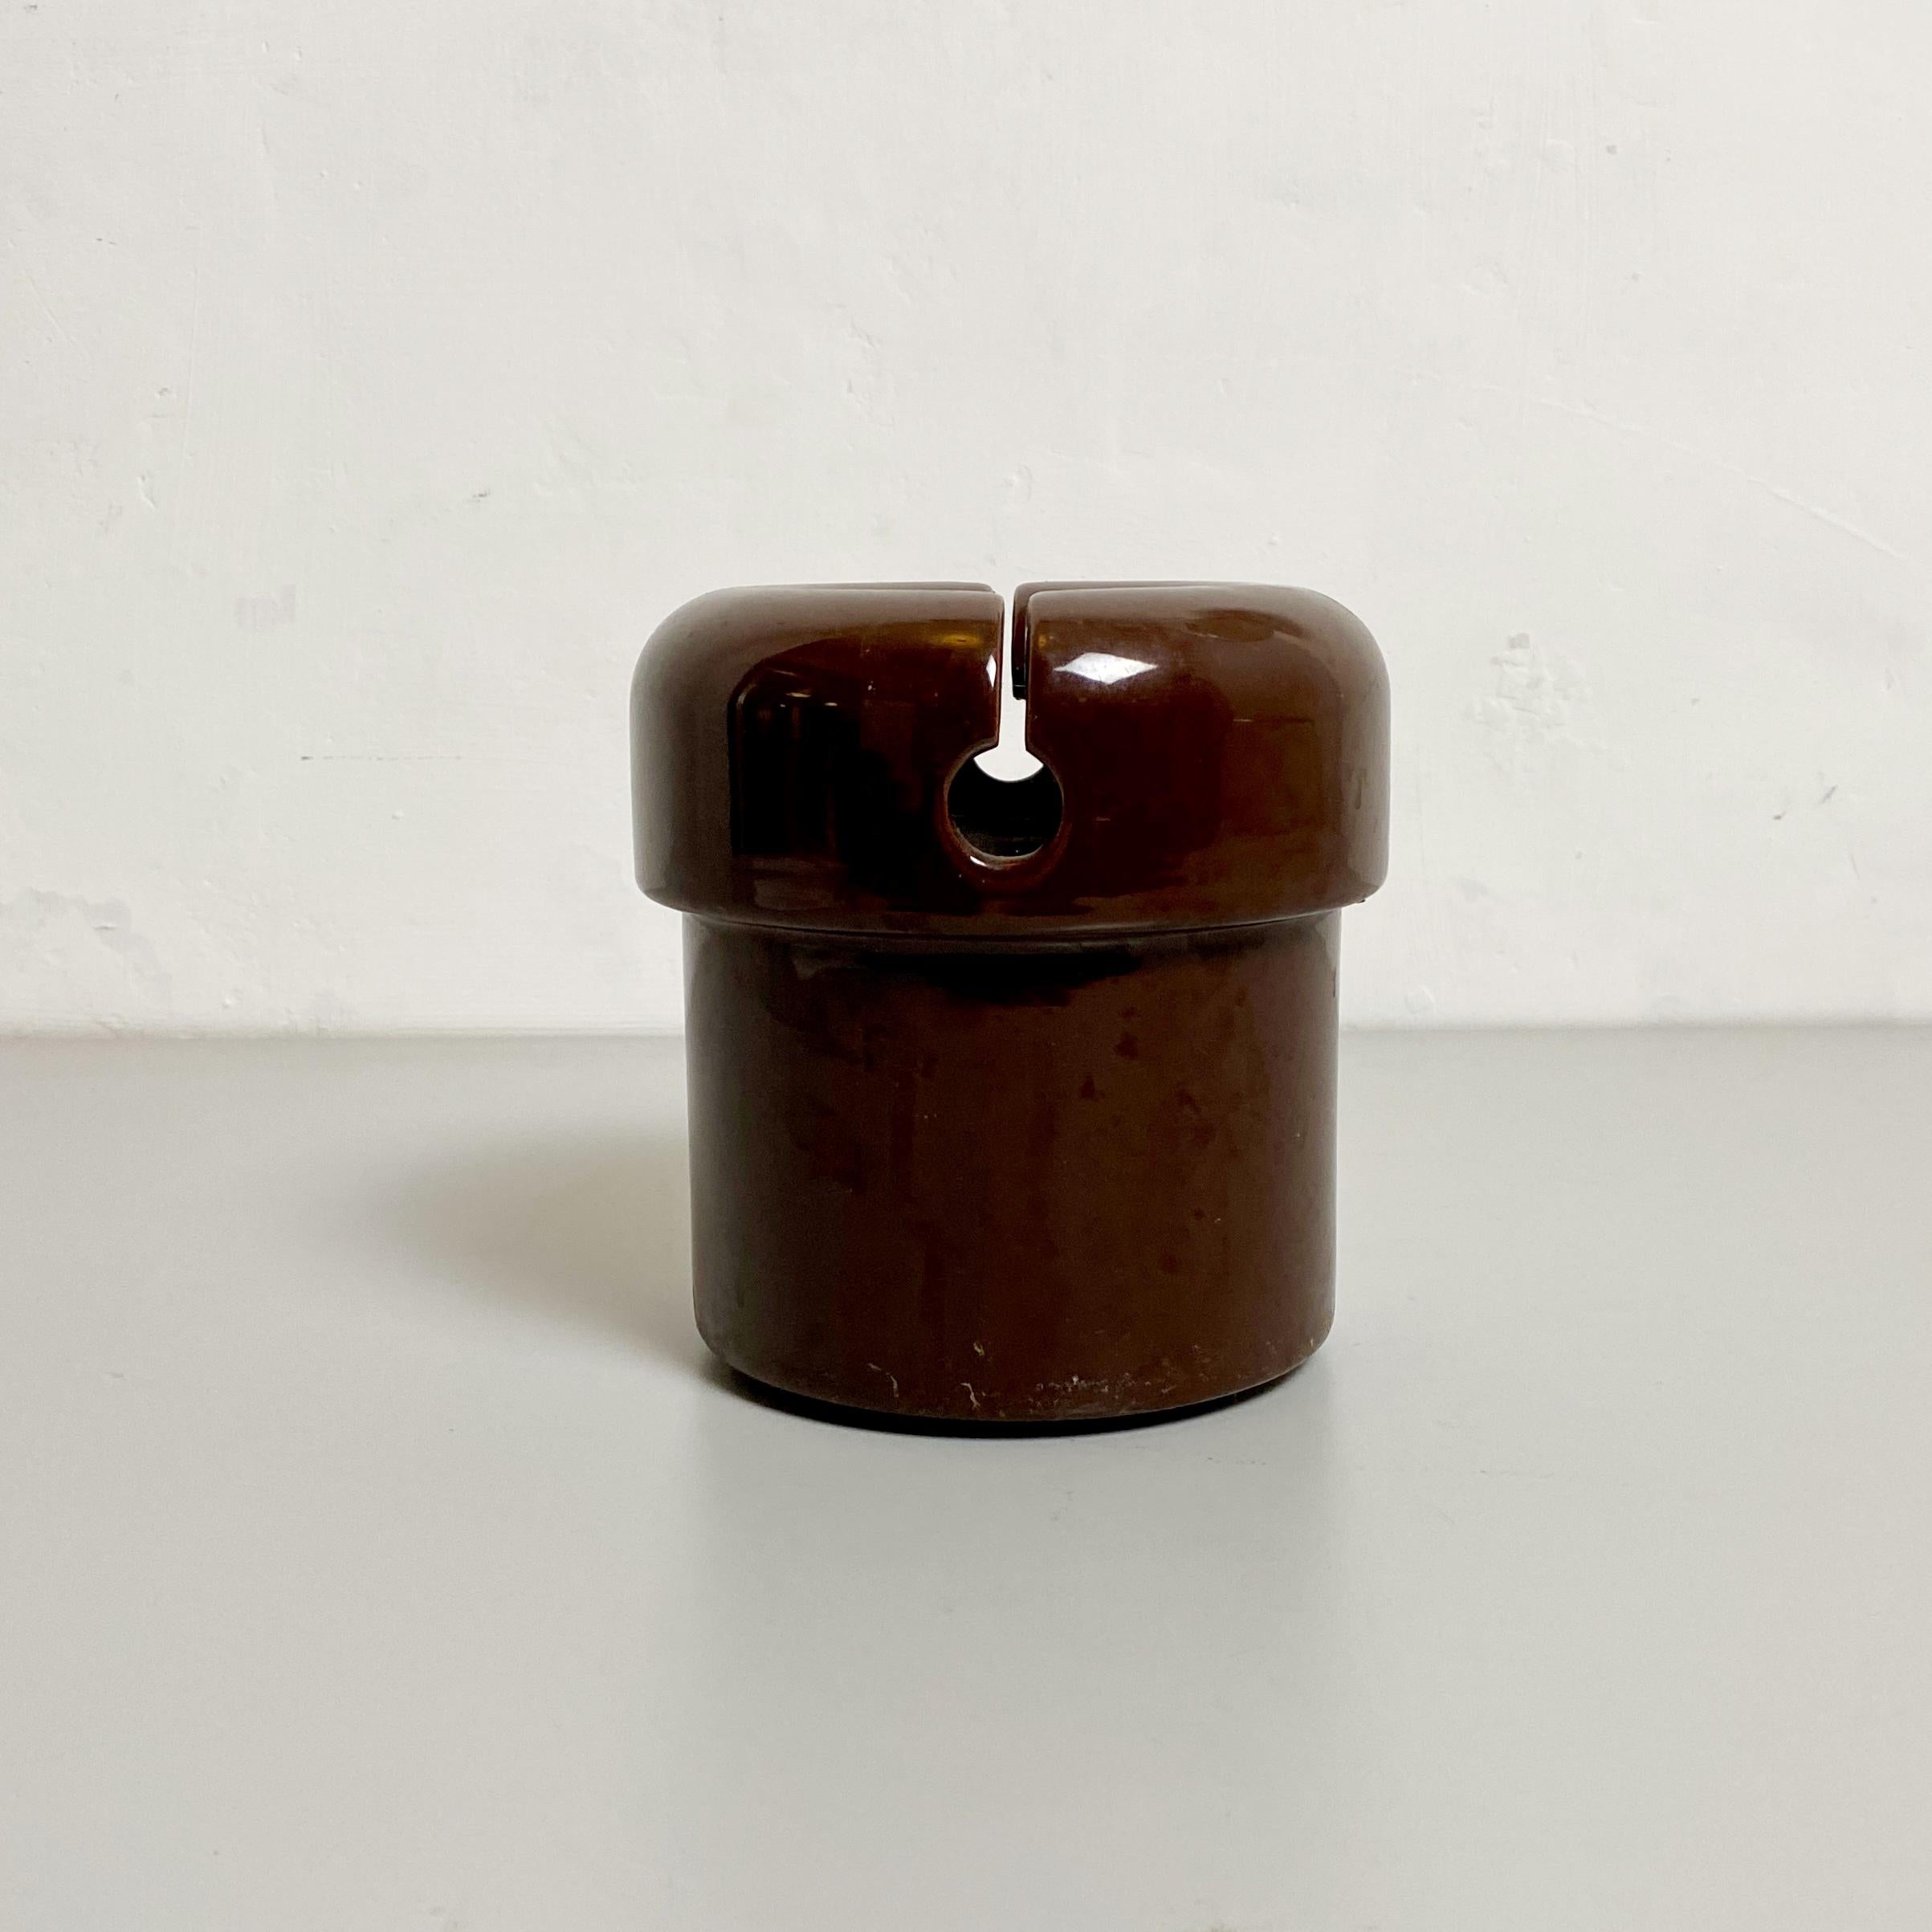 Italian Mid-Century Modern Brown Ceramic Vase by Lineareorm, 1960s For Sale 3